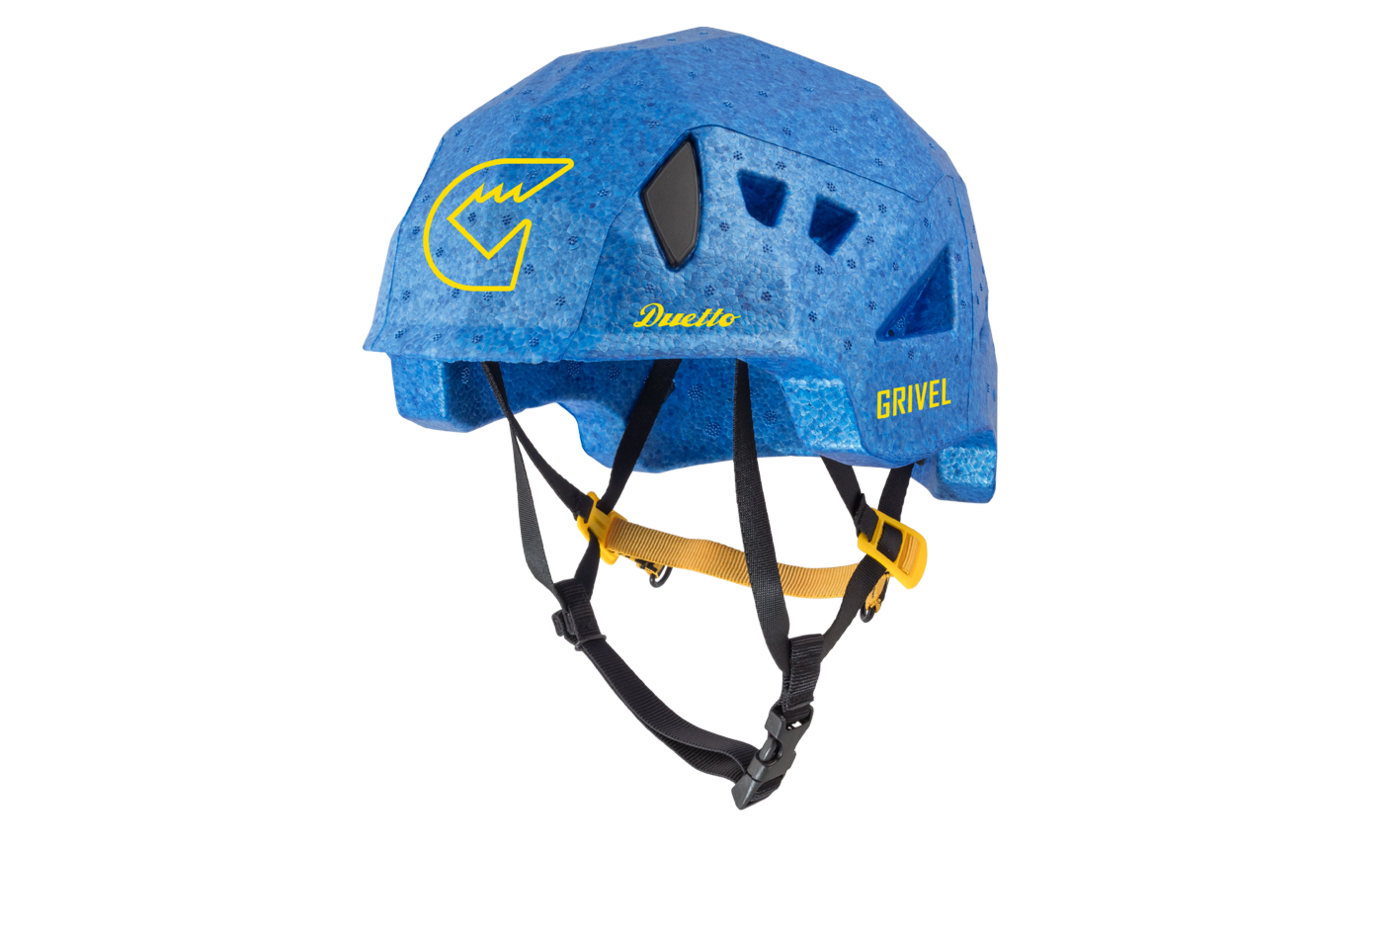 Grivel Duetto - Kask wspinaczkowy | Hardloop